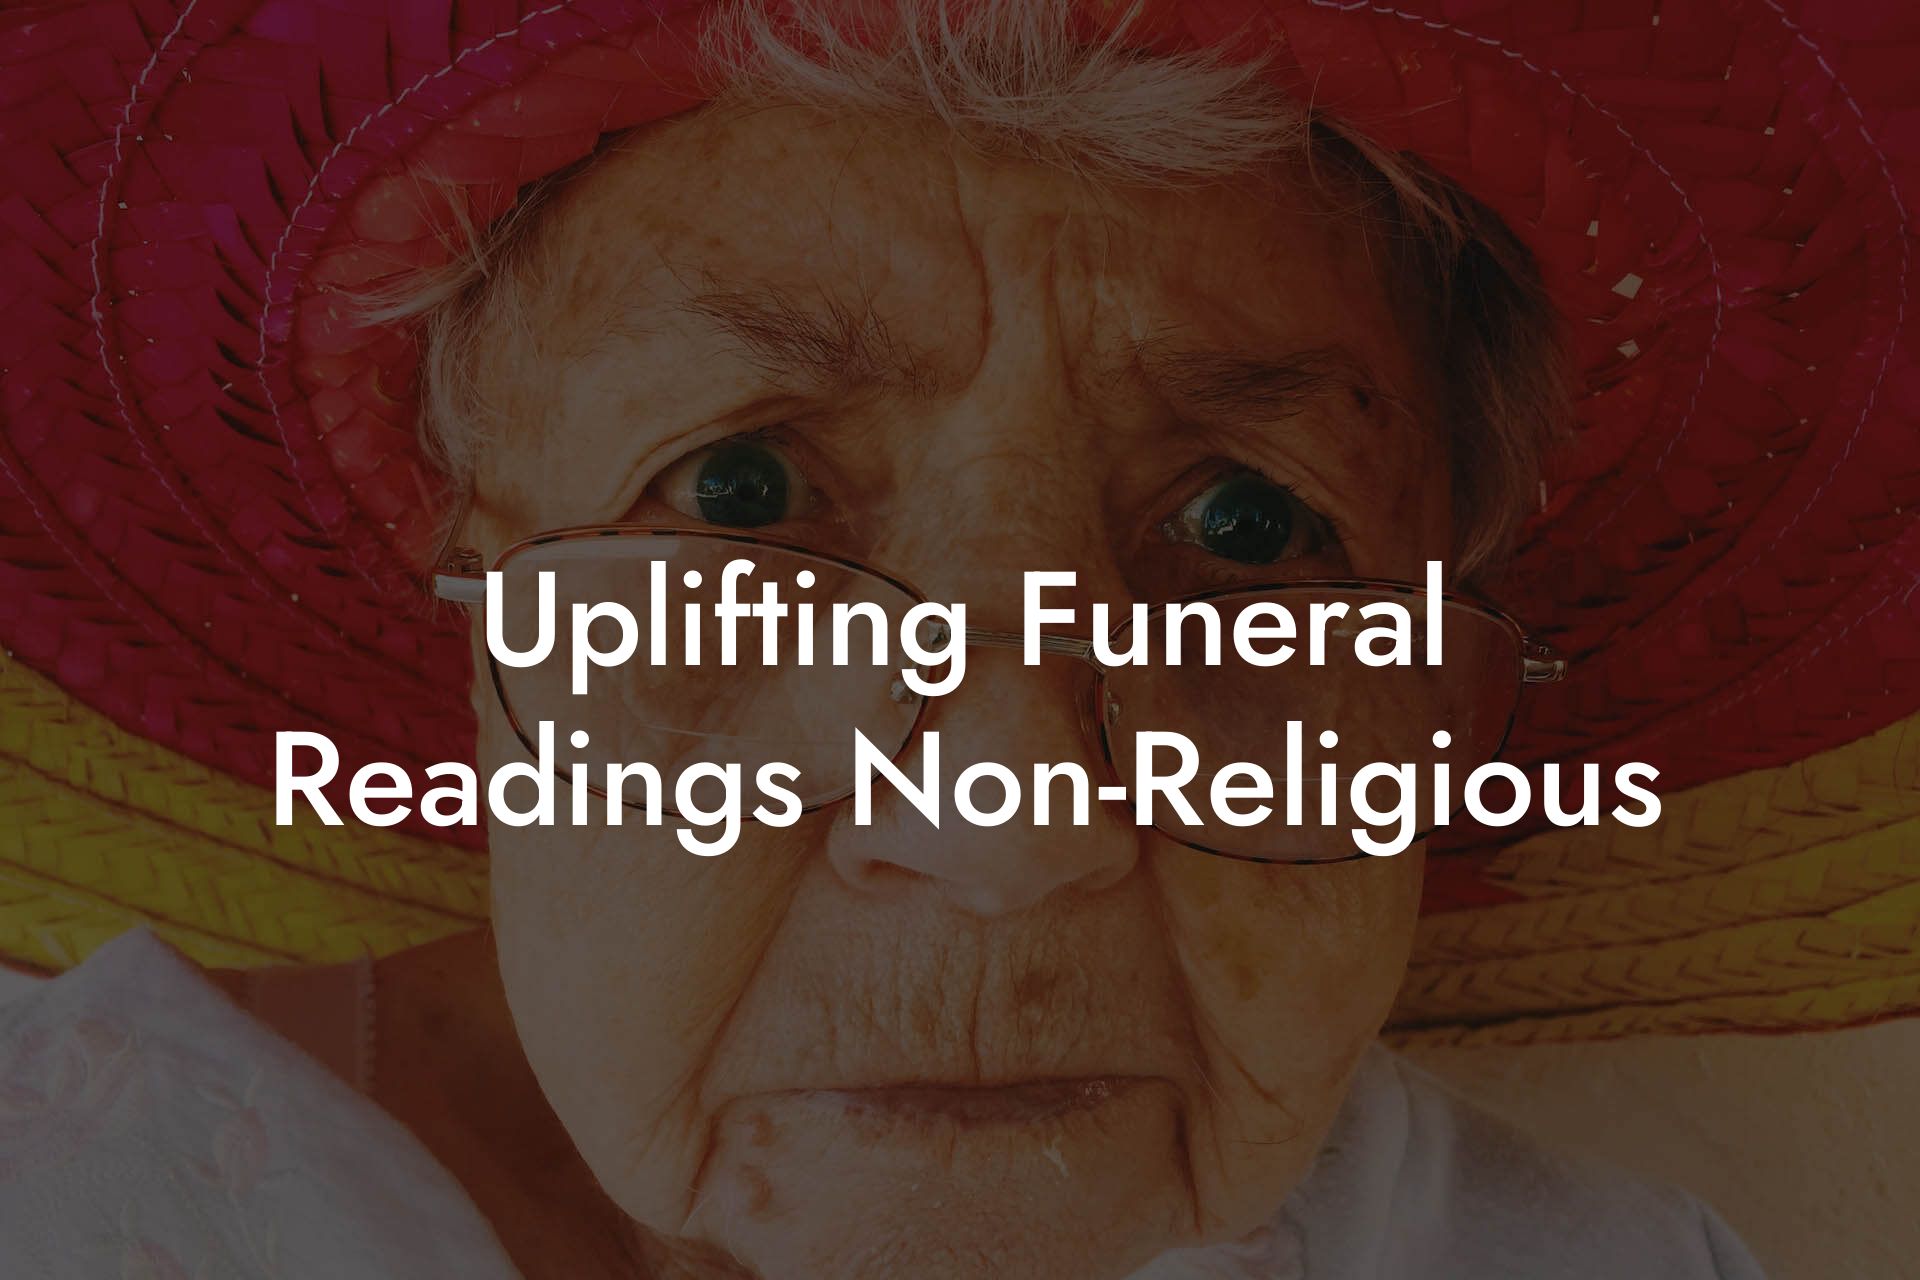 Uplifting Funeral Readings Non-Religious